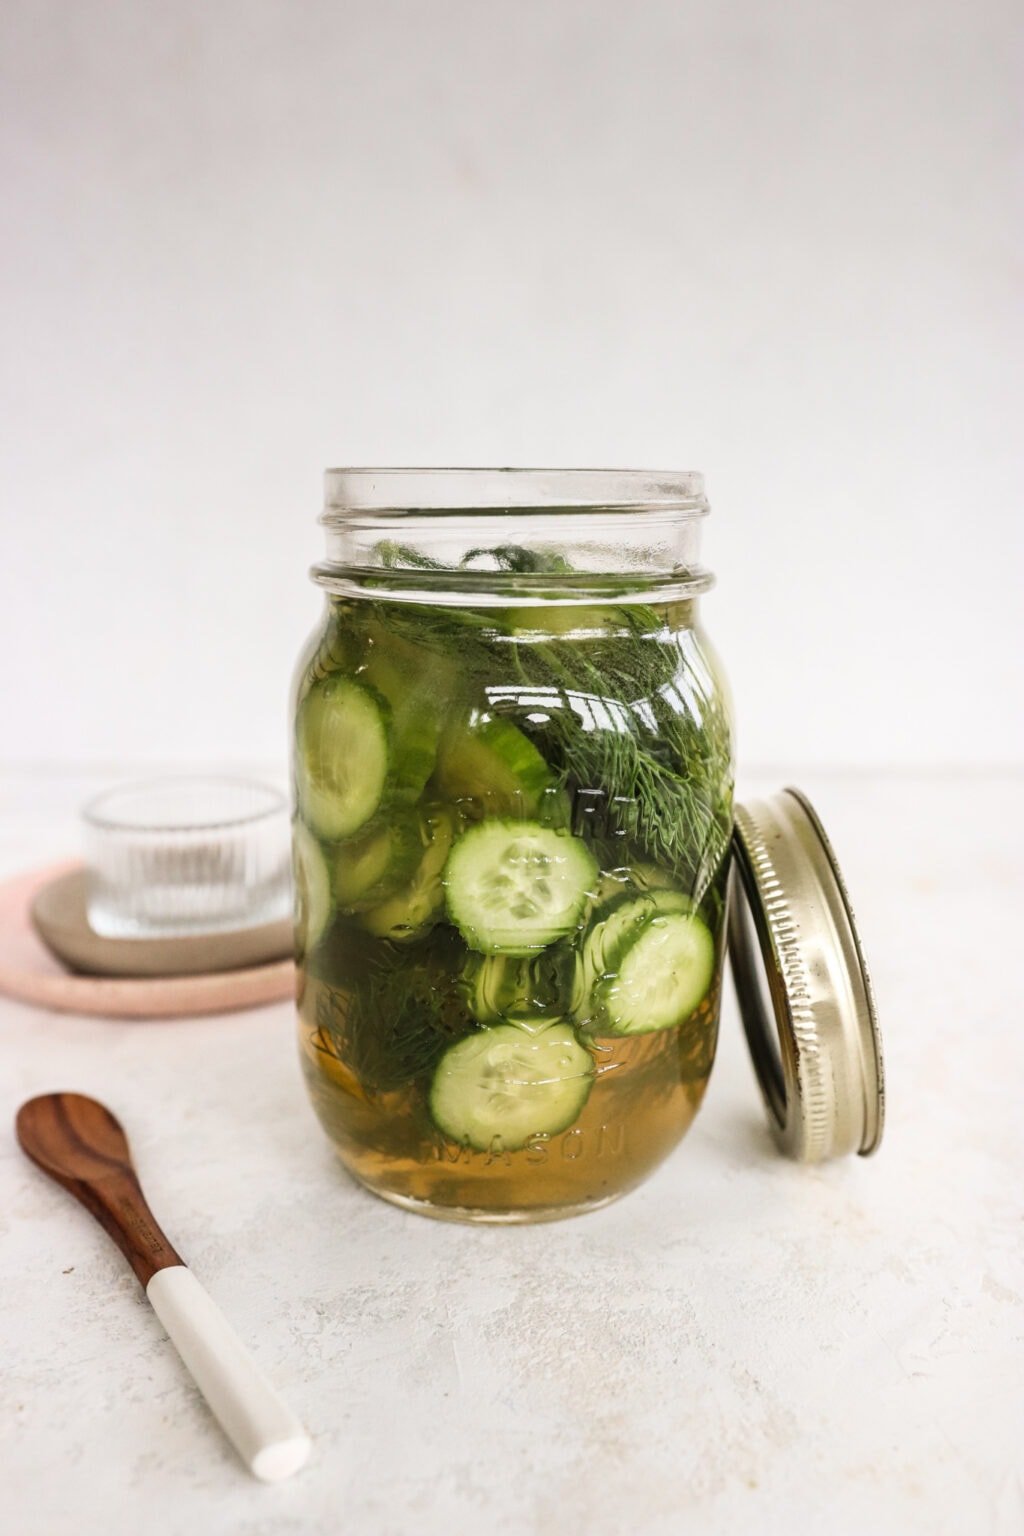 Apple Cider Vinegar Cucumber Pickles with Dill in a pickle jar with a wooden spoon and glass bowl beside the jar